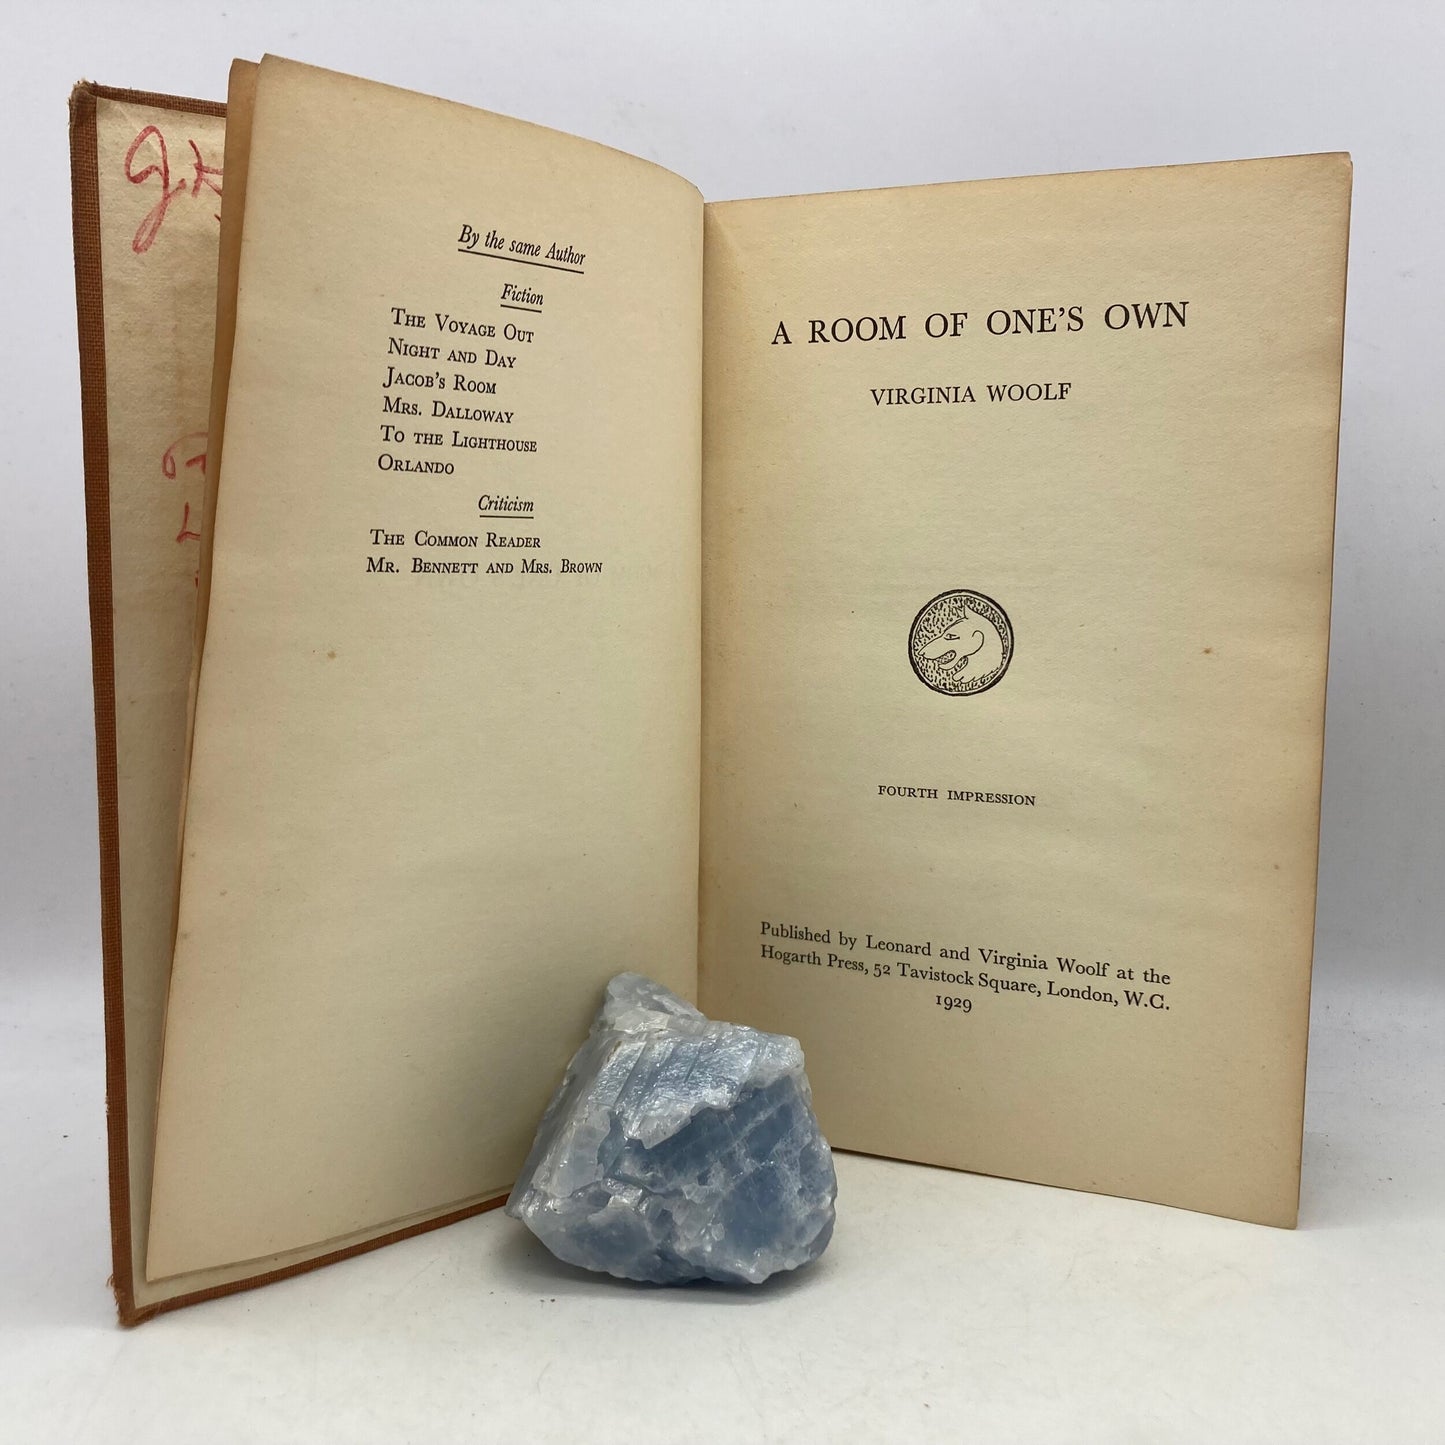 WOOLF, Virginia "A Room of One's Own" [Hogarth Press, 1929] 1st Edition - Buzz Bookstore